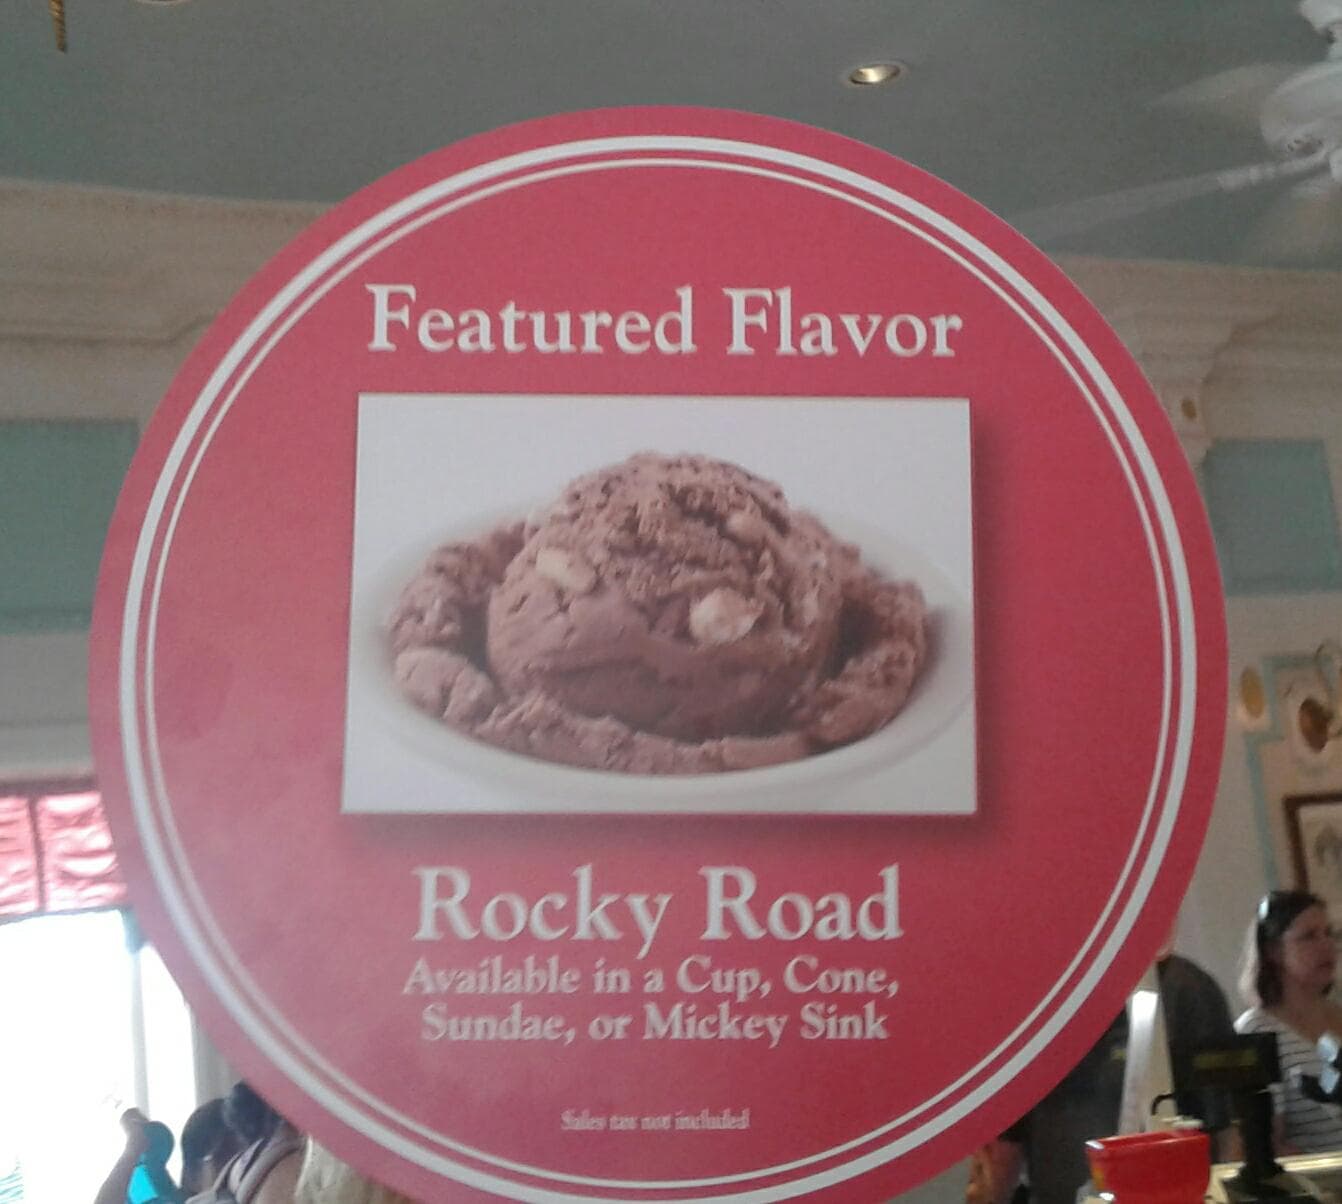 Rocky Road Ice Cream is the Flavor of the Month at The Plaza Ice Cream Parlor